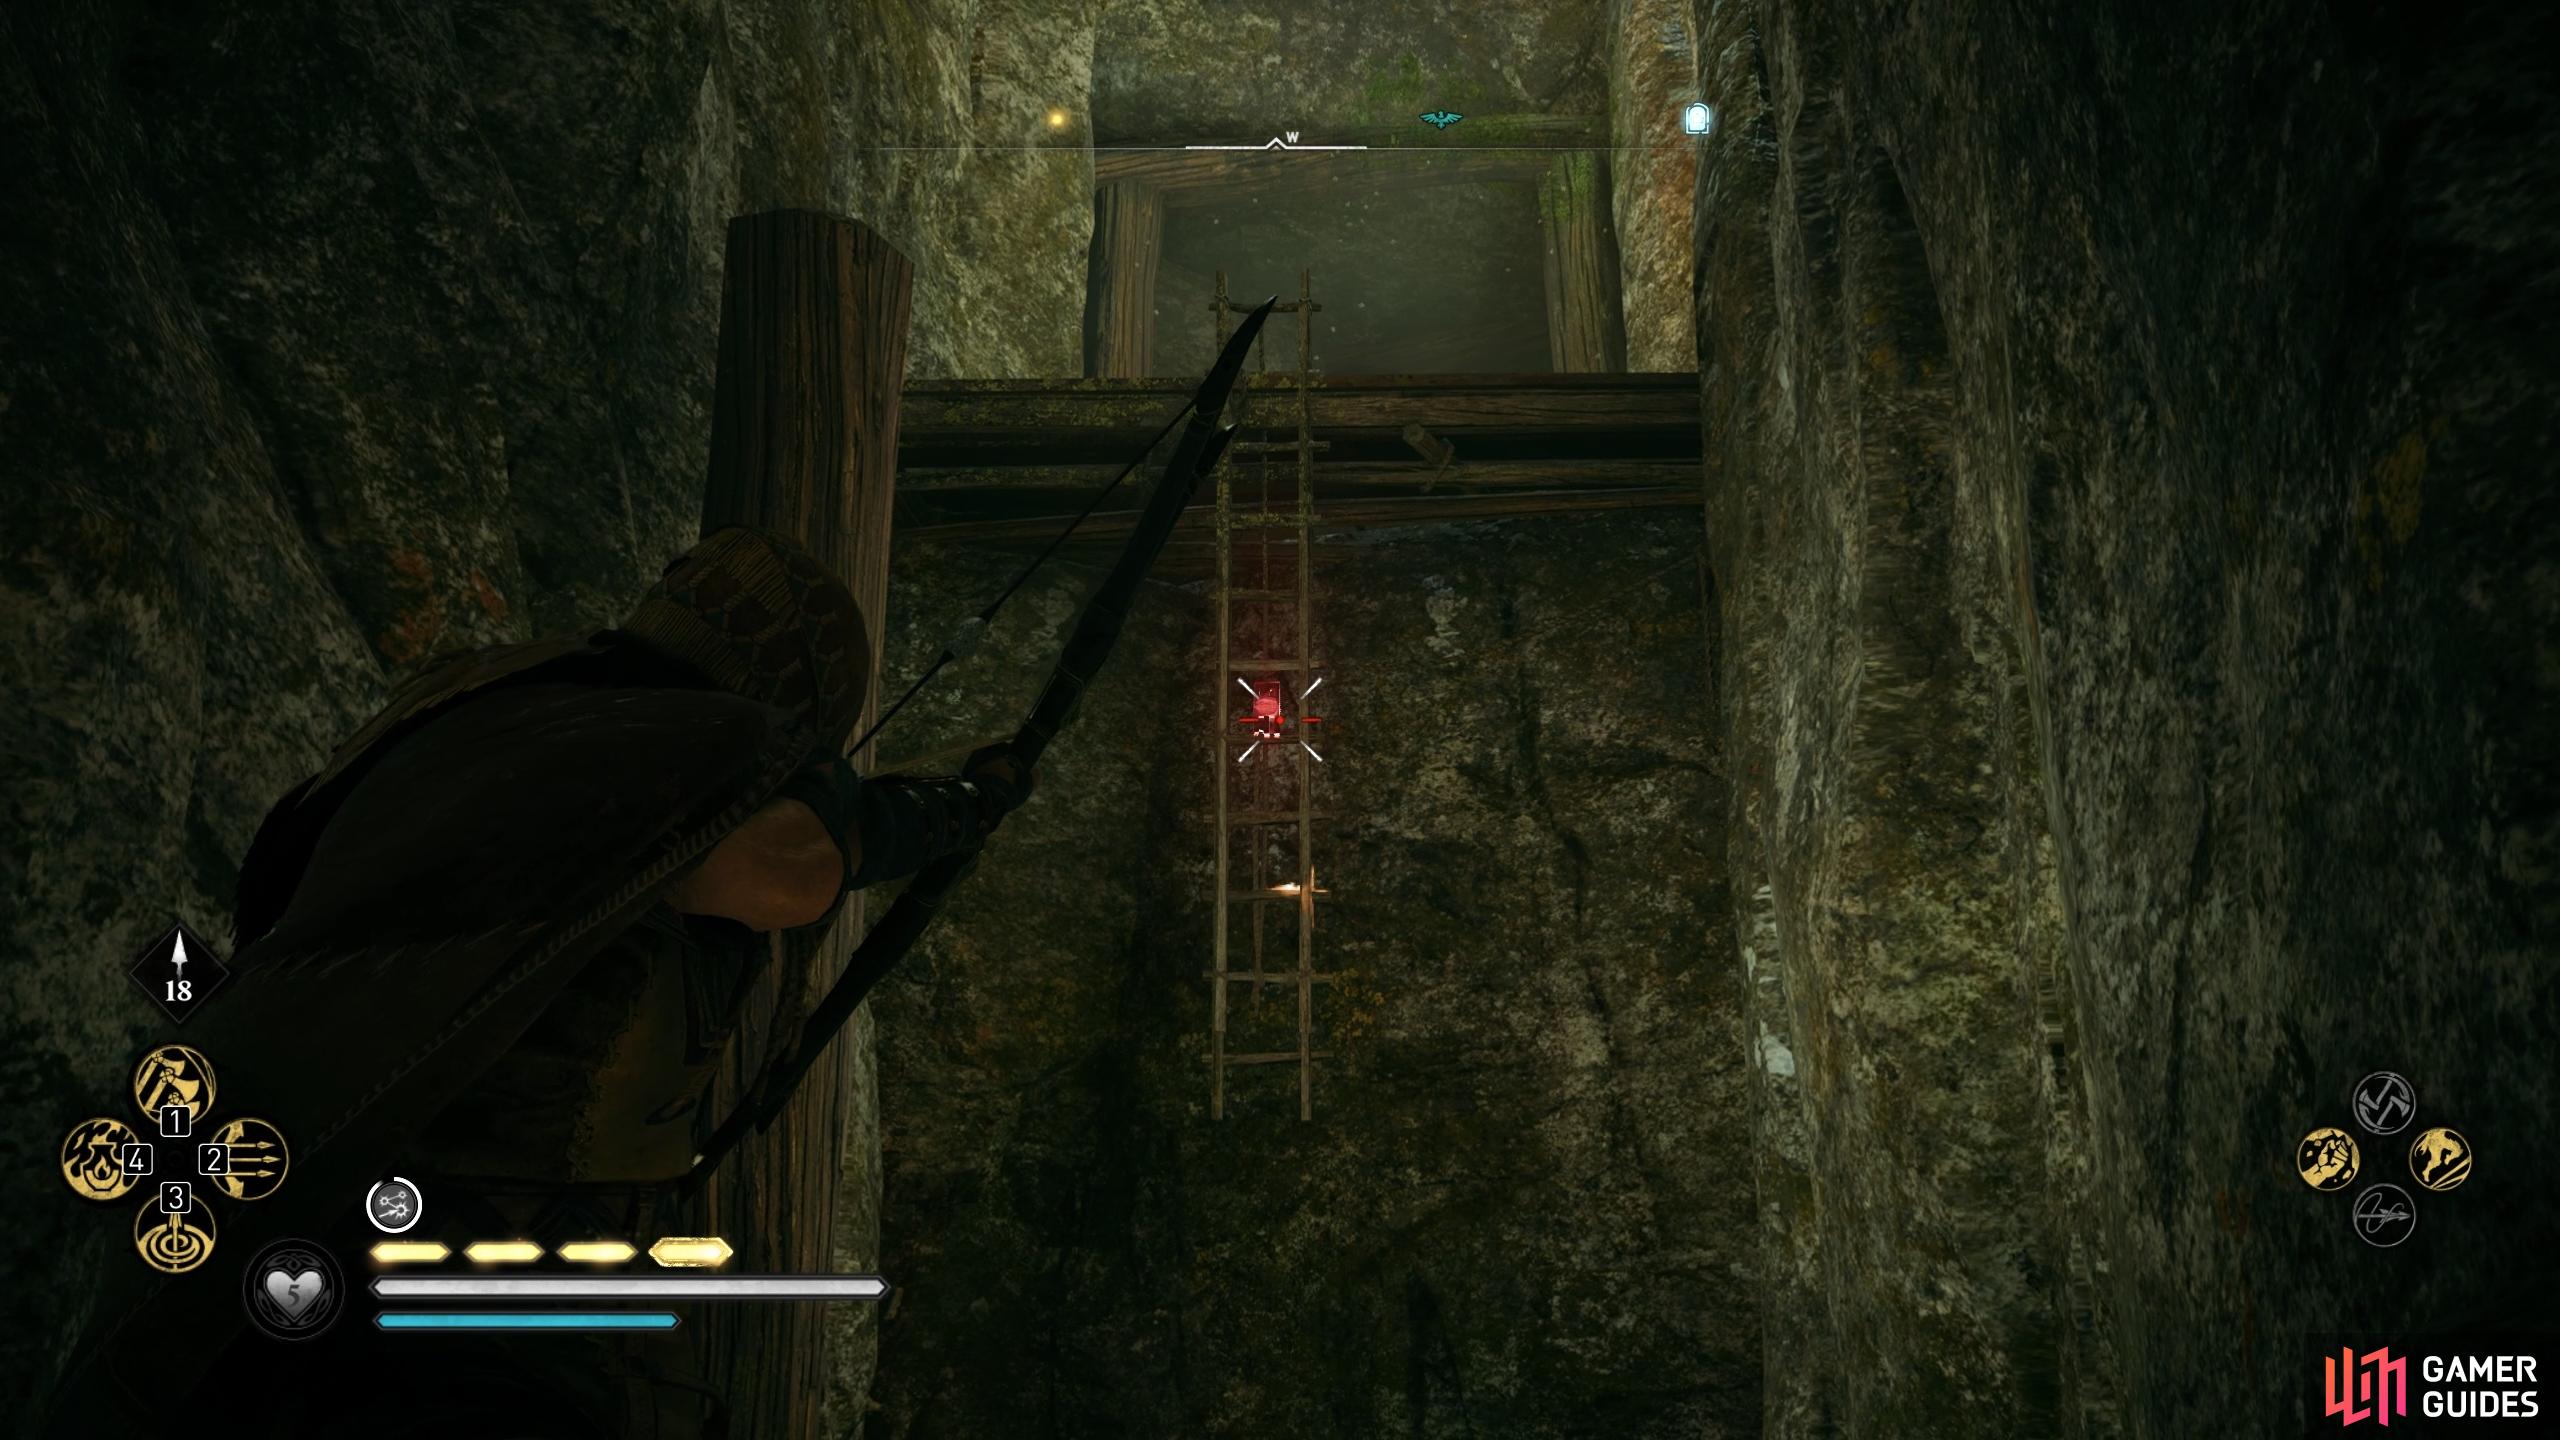 Shoot the link on the ladder to lower it.